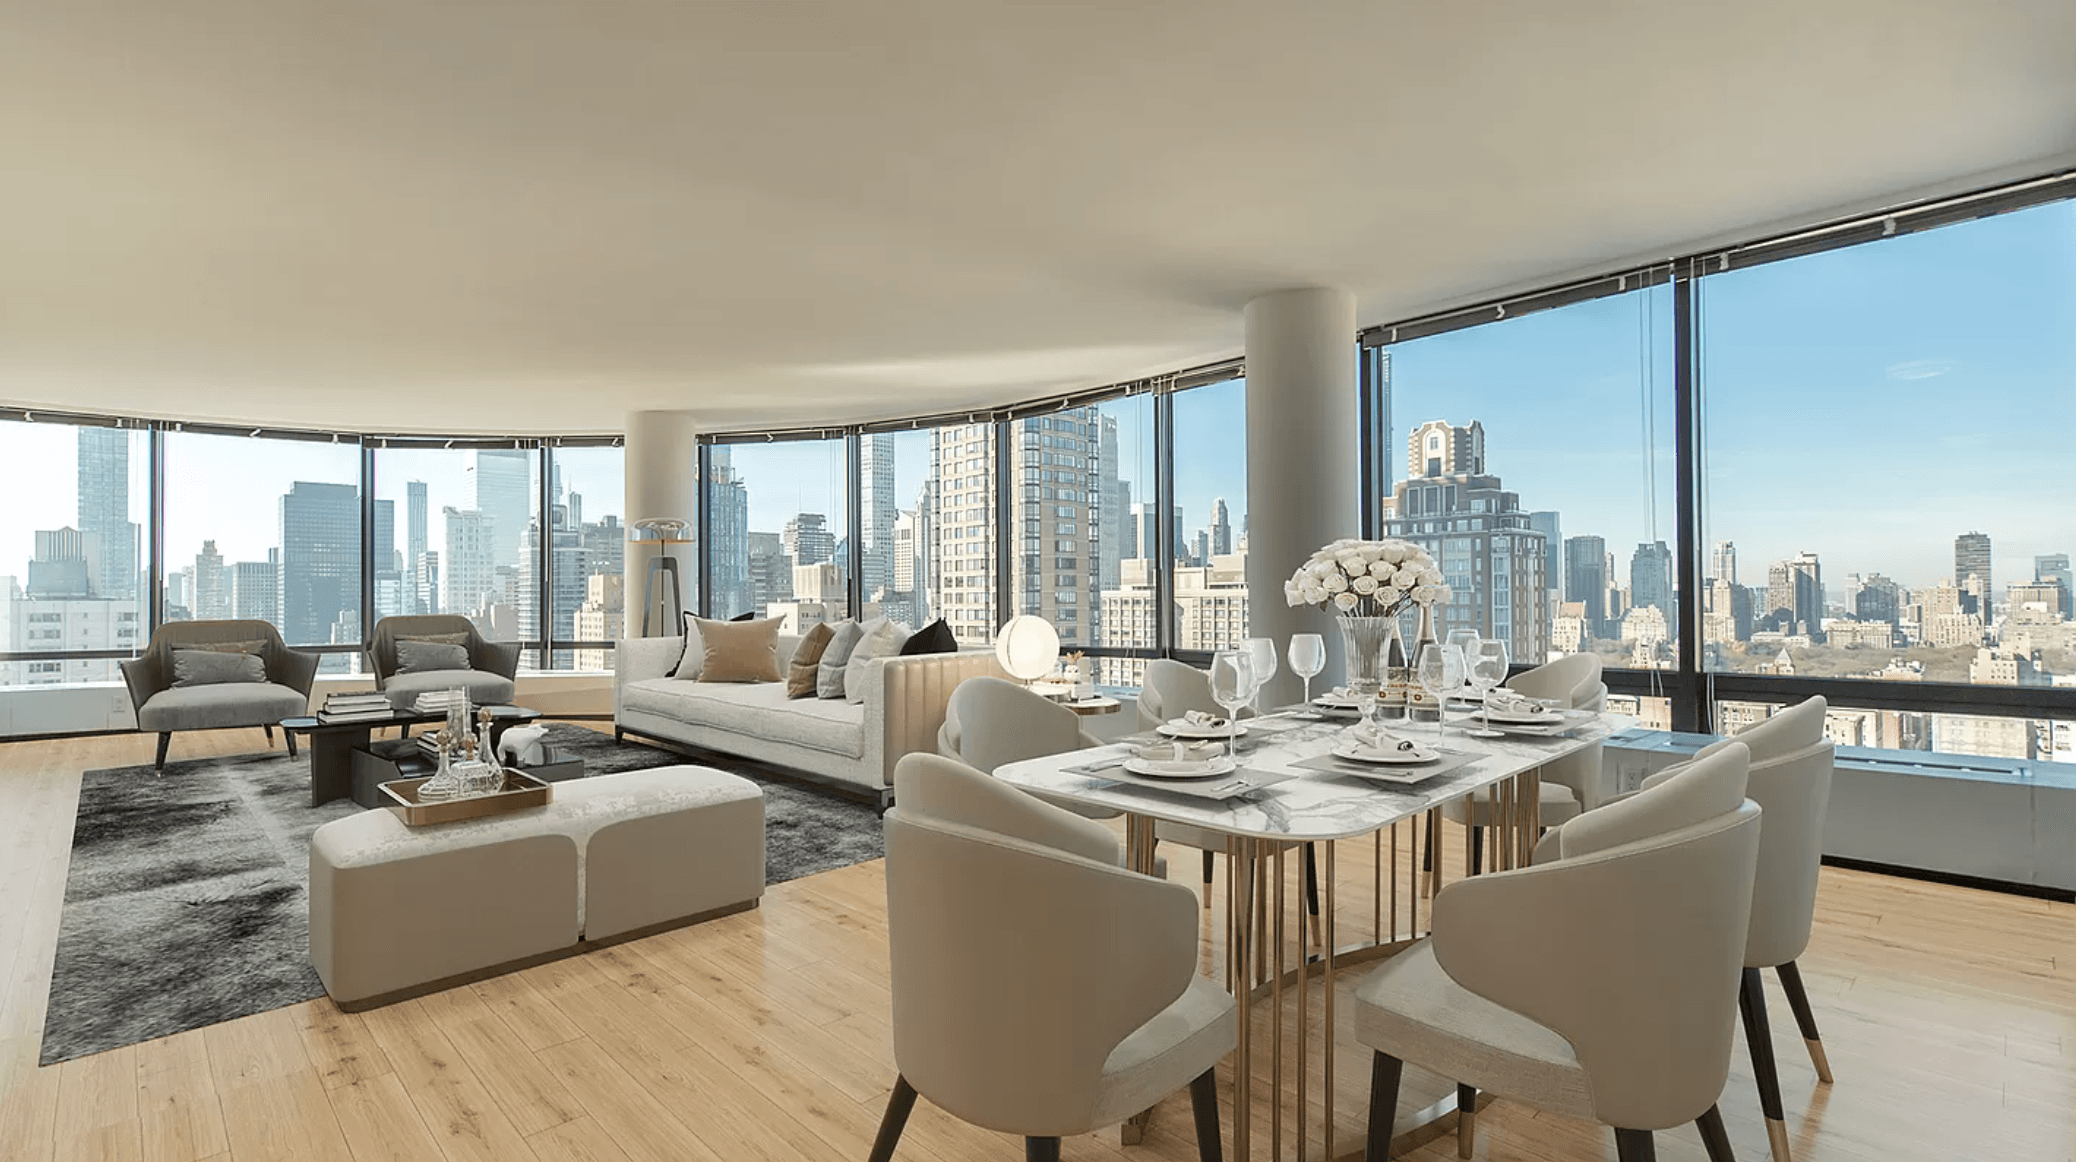 Vistas of Central Park & Midtown skyline unit, 1,550 Sq Ft, two-bed & two bath with a XL living room!